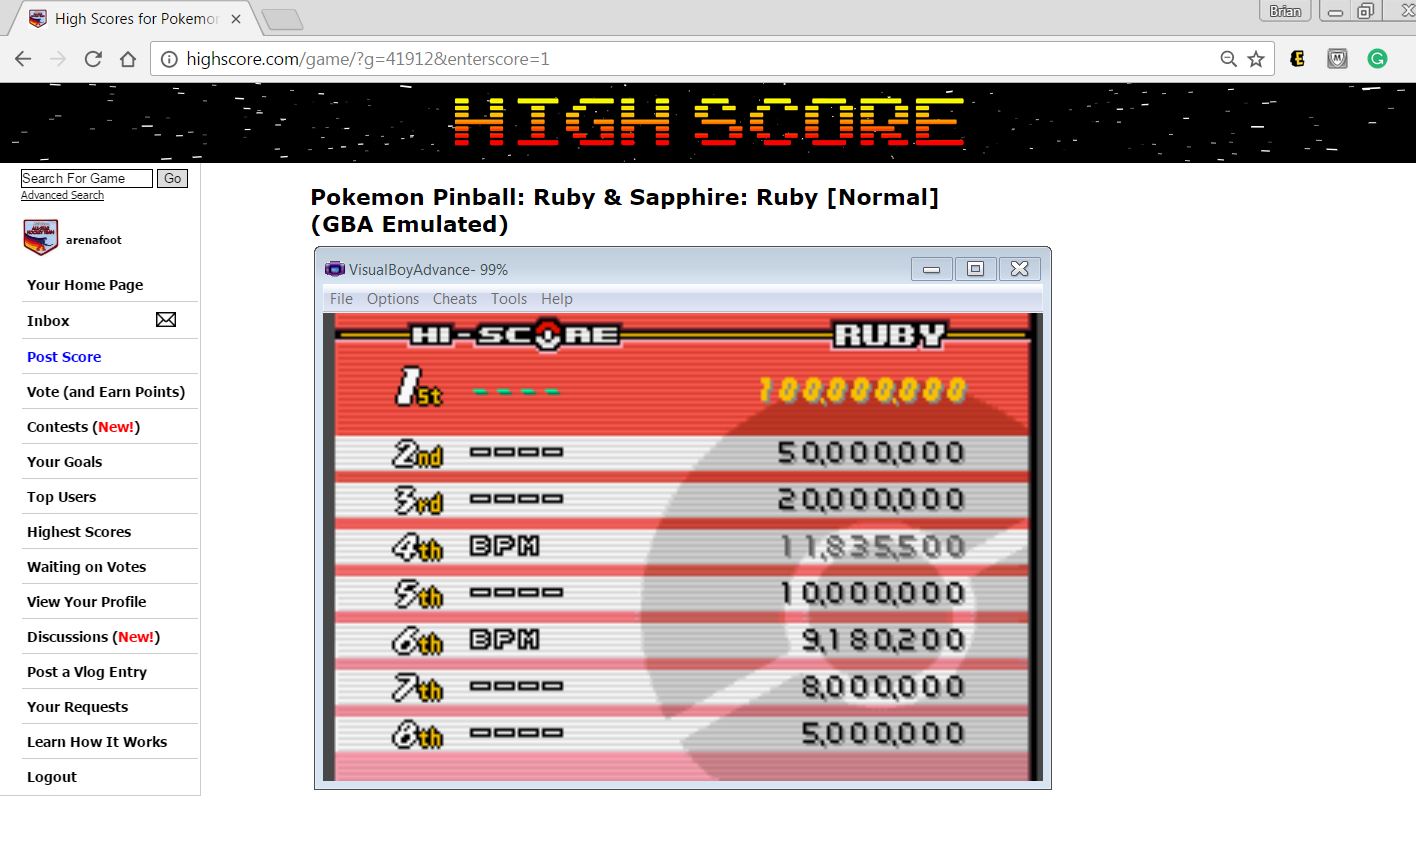 arenafoot: Pokemon Pinball: Ruby & Sapphire: Ruby [Normal] (GBA Emulated) 11,835,500 points on 2017-03-30 16:42:31